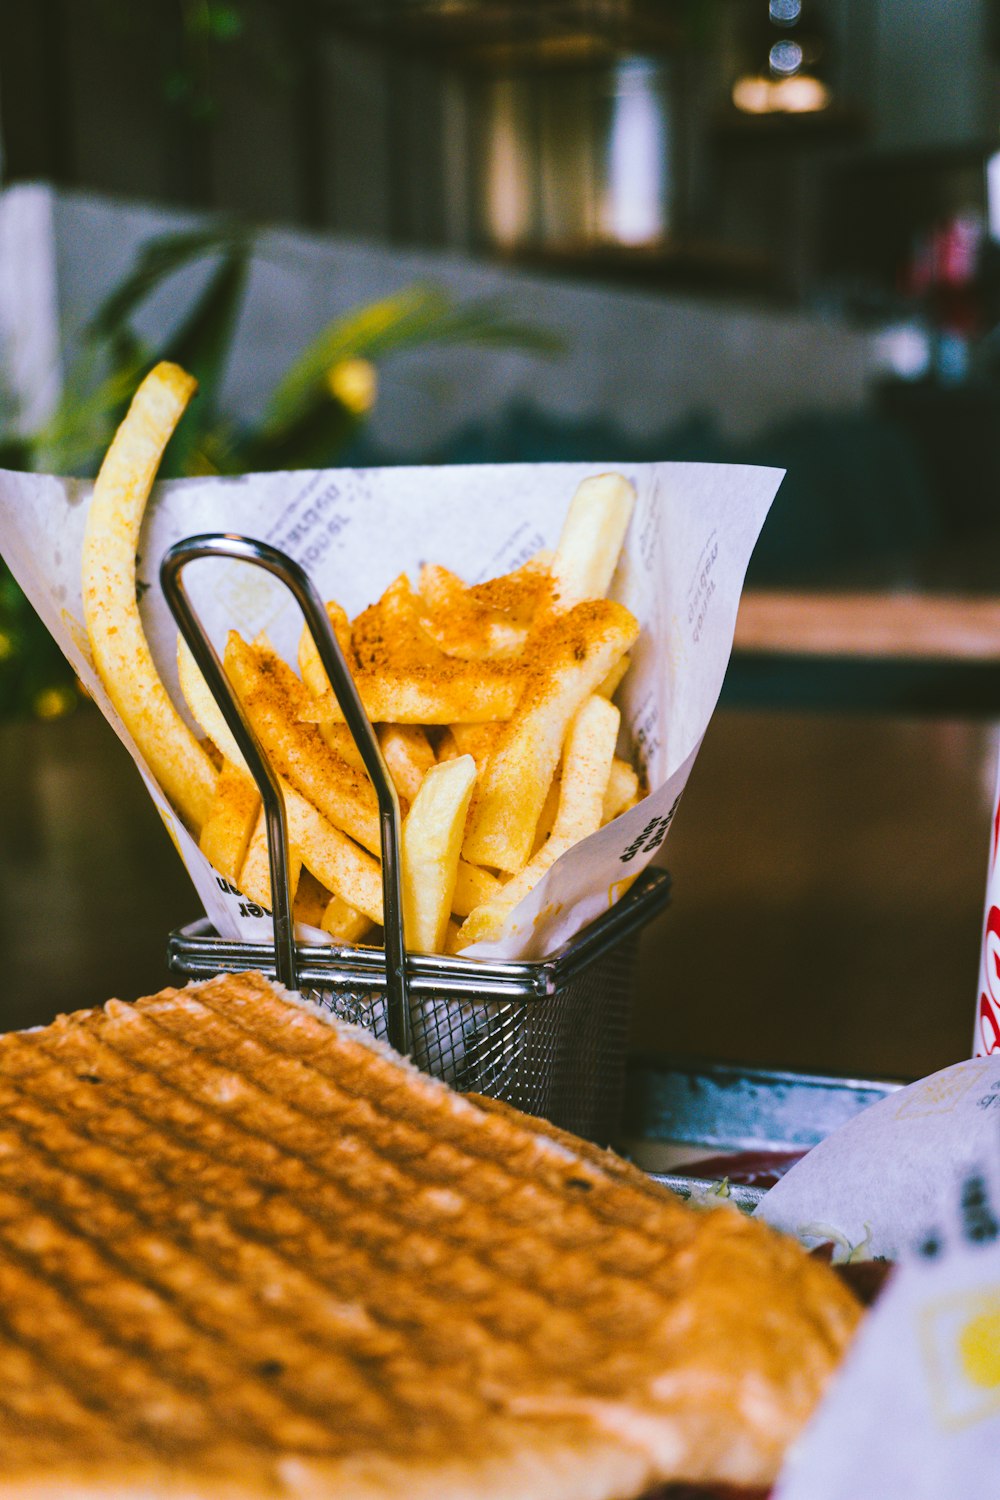 a basket filled with french fries next to a sandwich